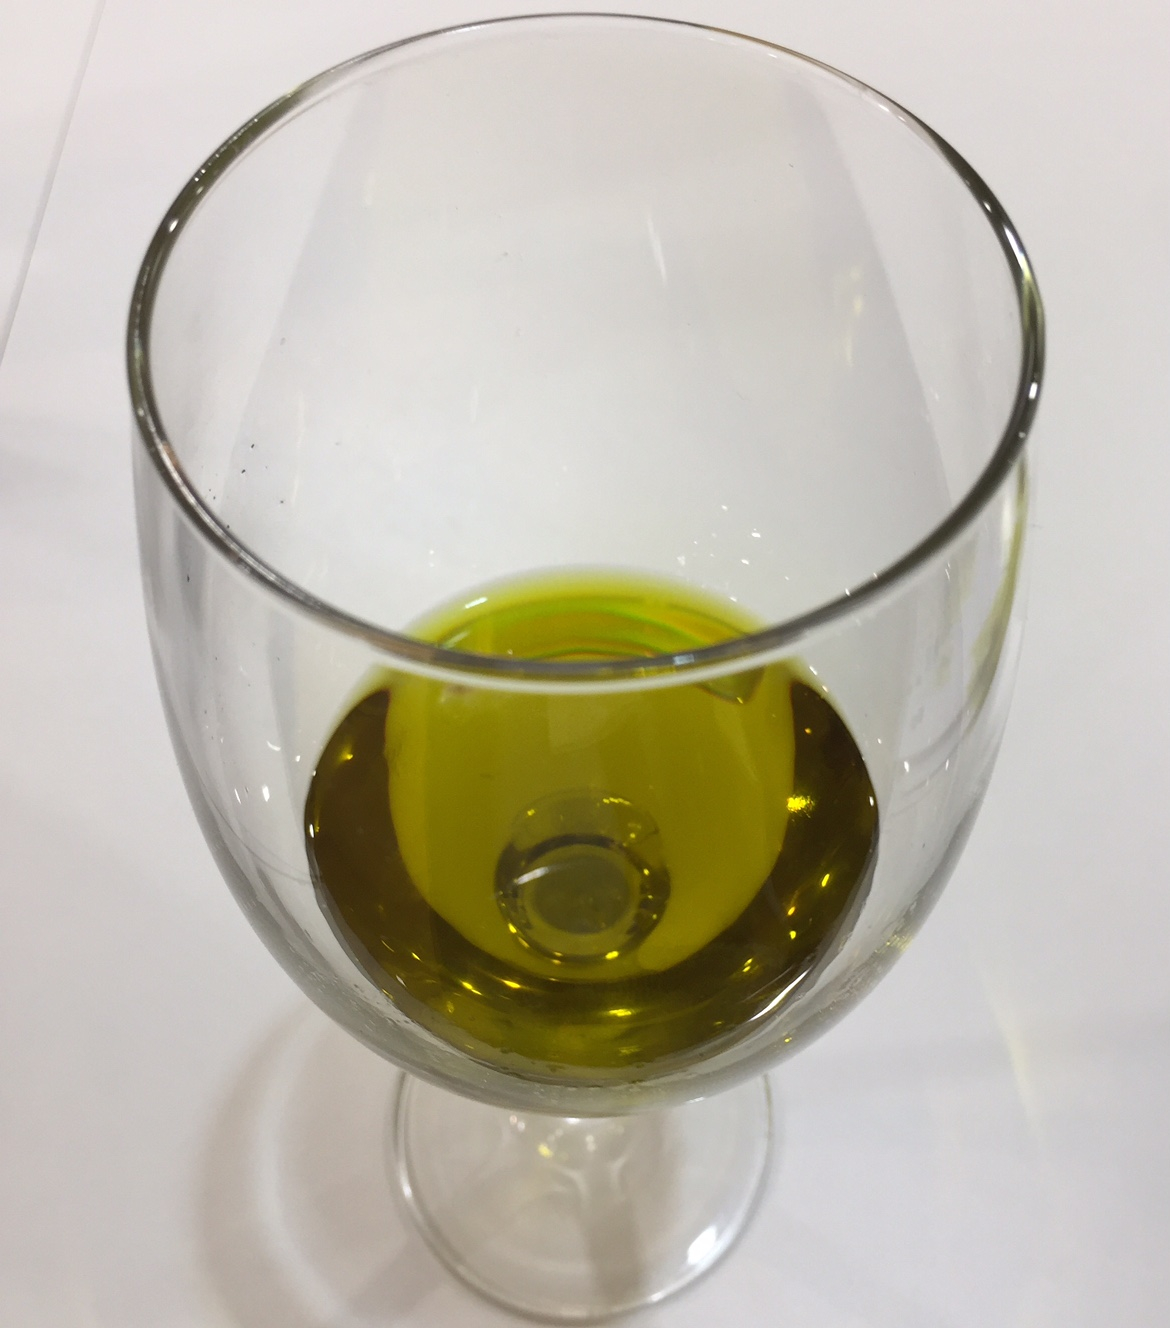 Olive oil stocked In Italy. Update of 31 August 2020